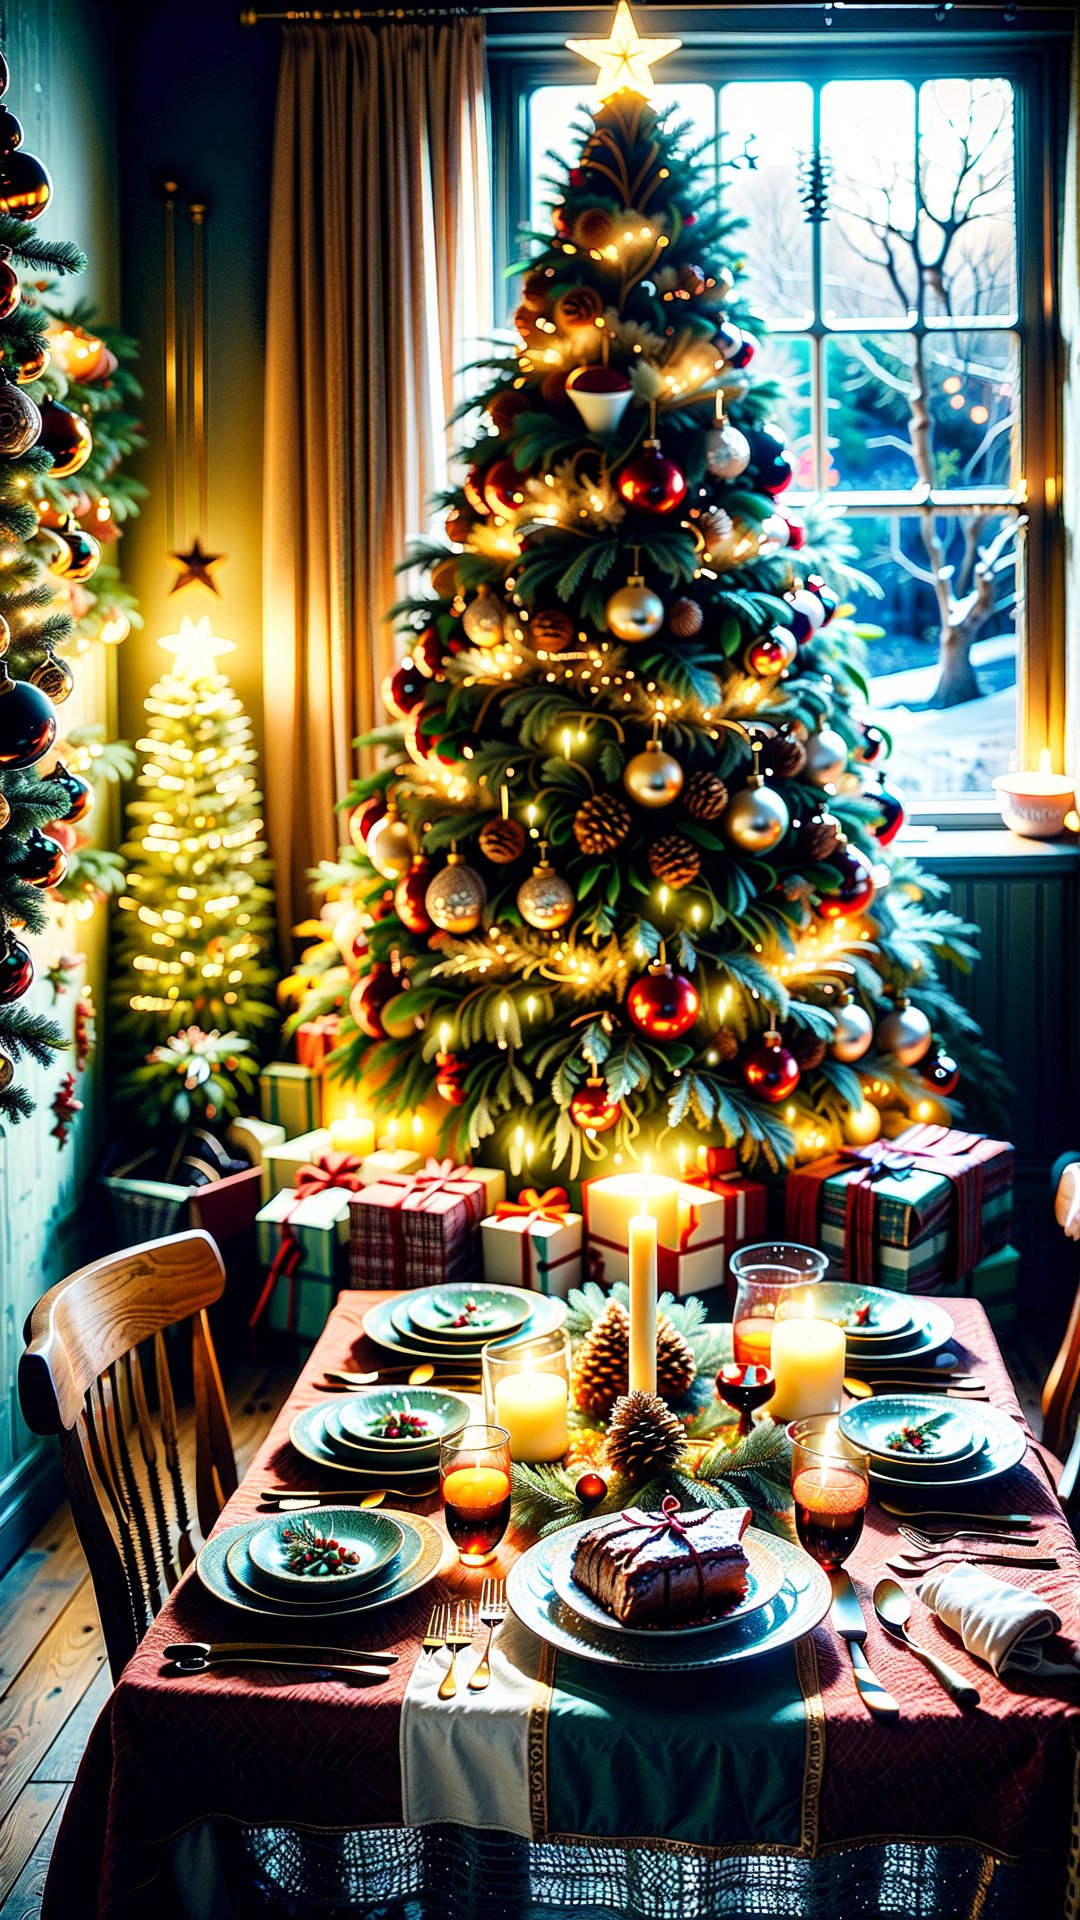 Christmas-themed room, The room is adorned with holiday decorations, creating a warm and inviting atmosphere. The dining table is the centerpiece, covered with a colorful tablecloth and laden with an array of Christmas foods, including a roast, various pies, and seasonal fruits. The highlight on the table is a large, artistically decorated Christmas tree-shaped cake. In the background, a beautifully decorated Christmas tree is illuminated with strings of lights, adding to the festive ambiance. Outside the window, the scene is enchanting with unique snowflake patterns gently falling, creating a picturesque winter wonderland. The overall scene encapsulates the joy and warmth of the Christmas season, Santa Claus,